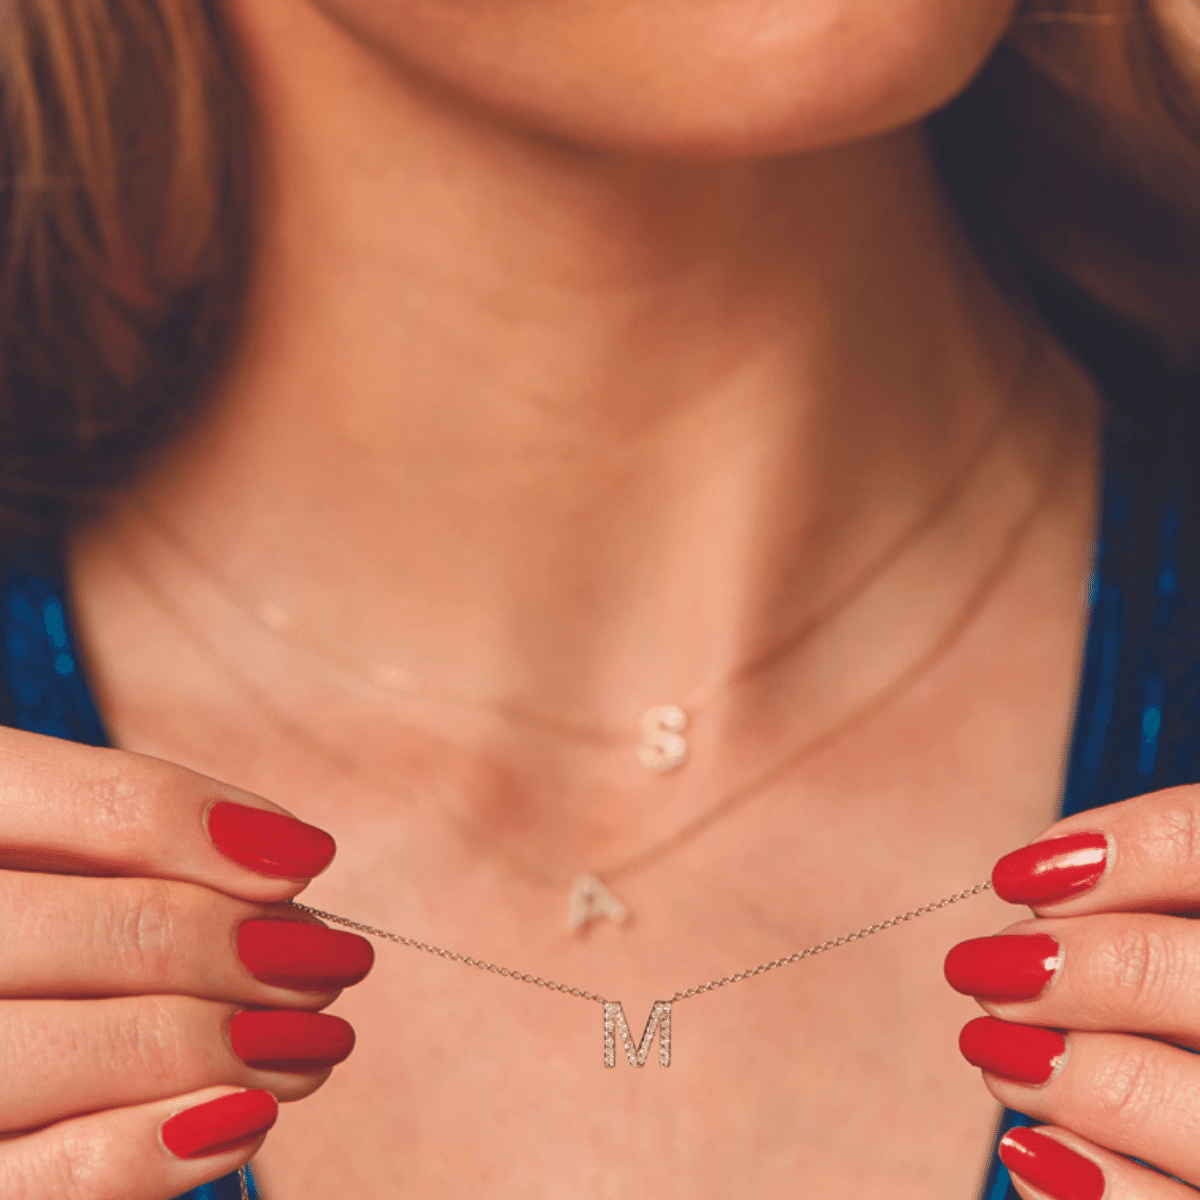 9ct White Gold Diamond Initial 'V' Necklace